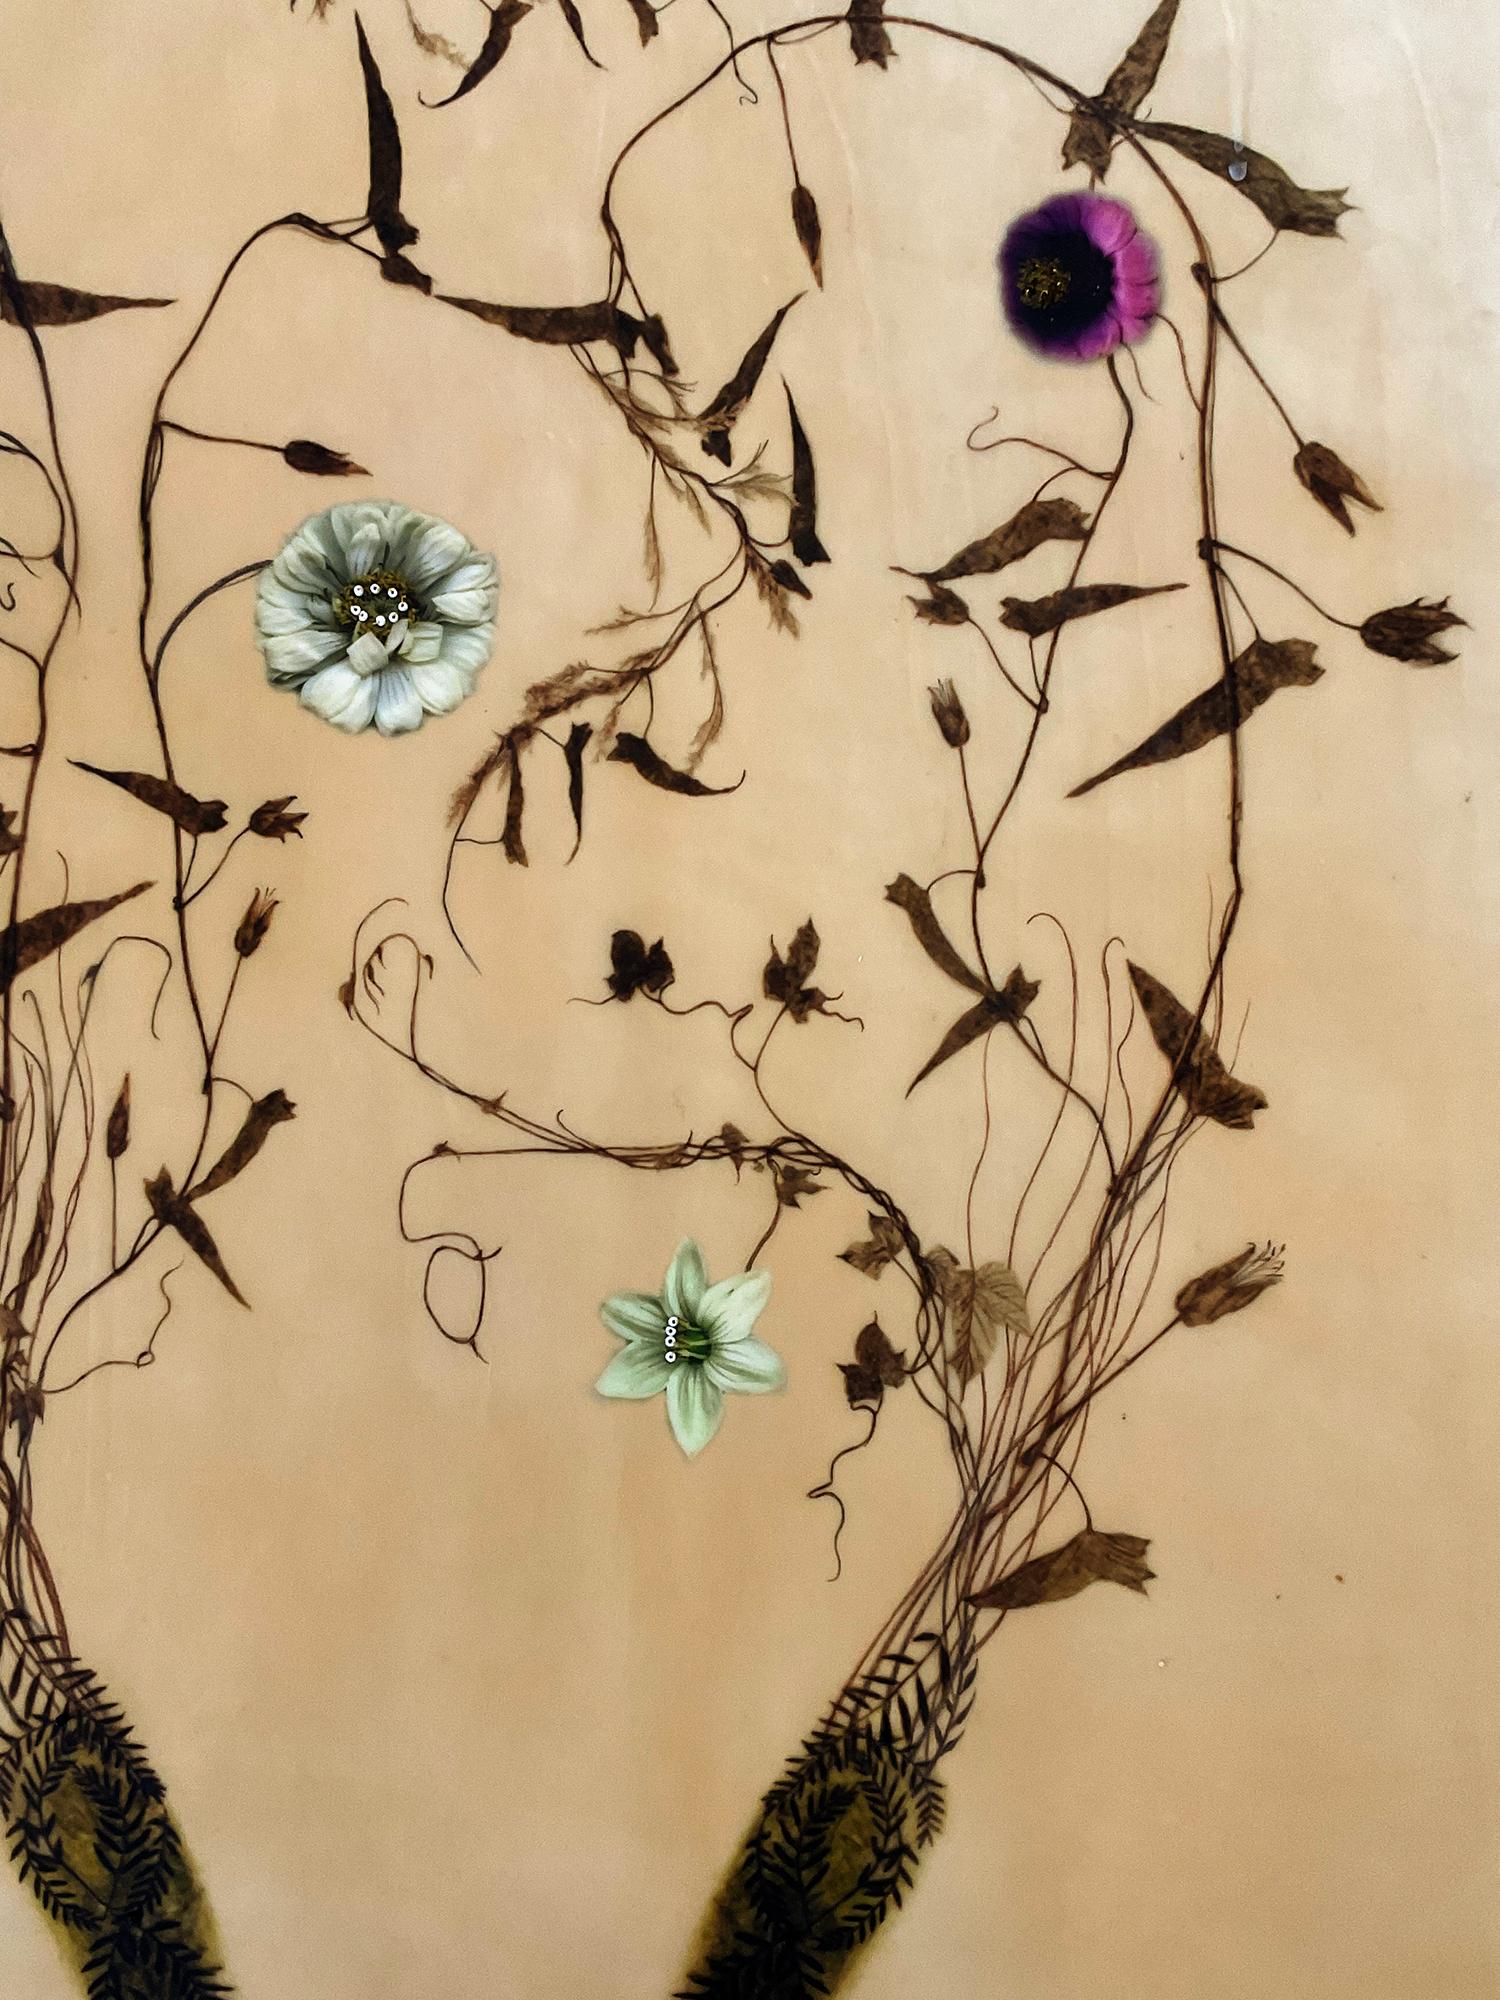 Traces 51 (Whimsical Mixed Media Drawing of Hands Trailing Botanicals and Vines) - Painting by Valerie Hammond